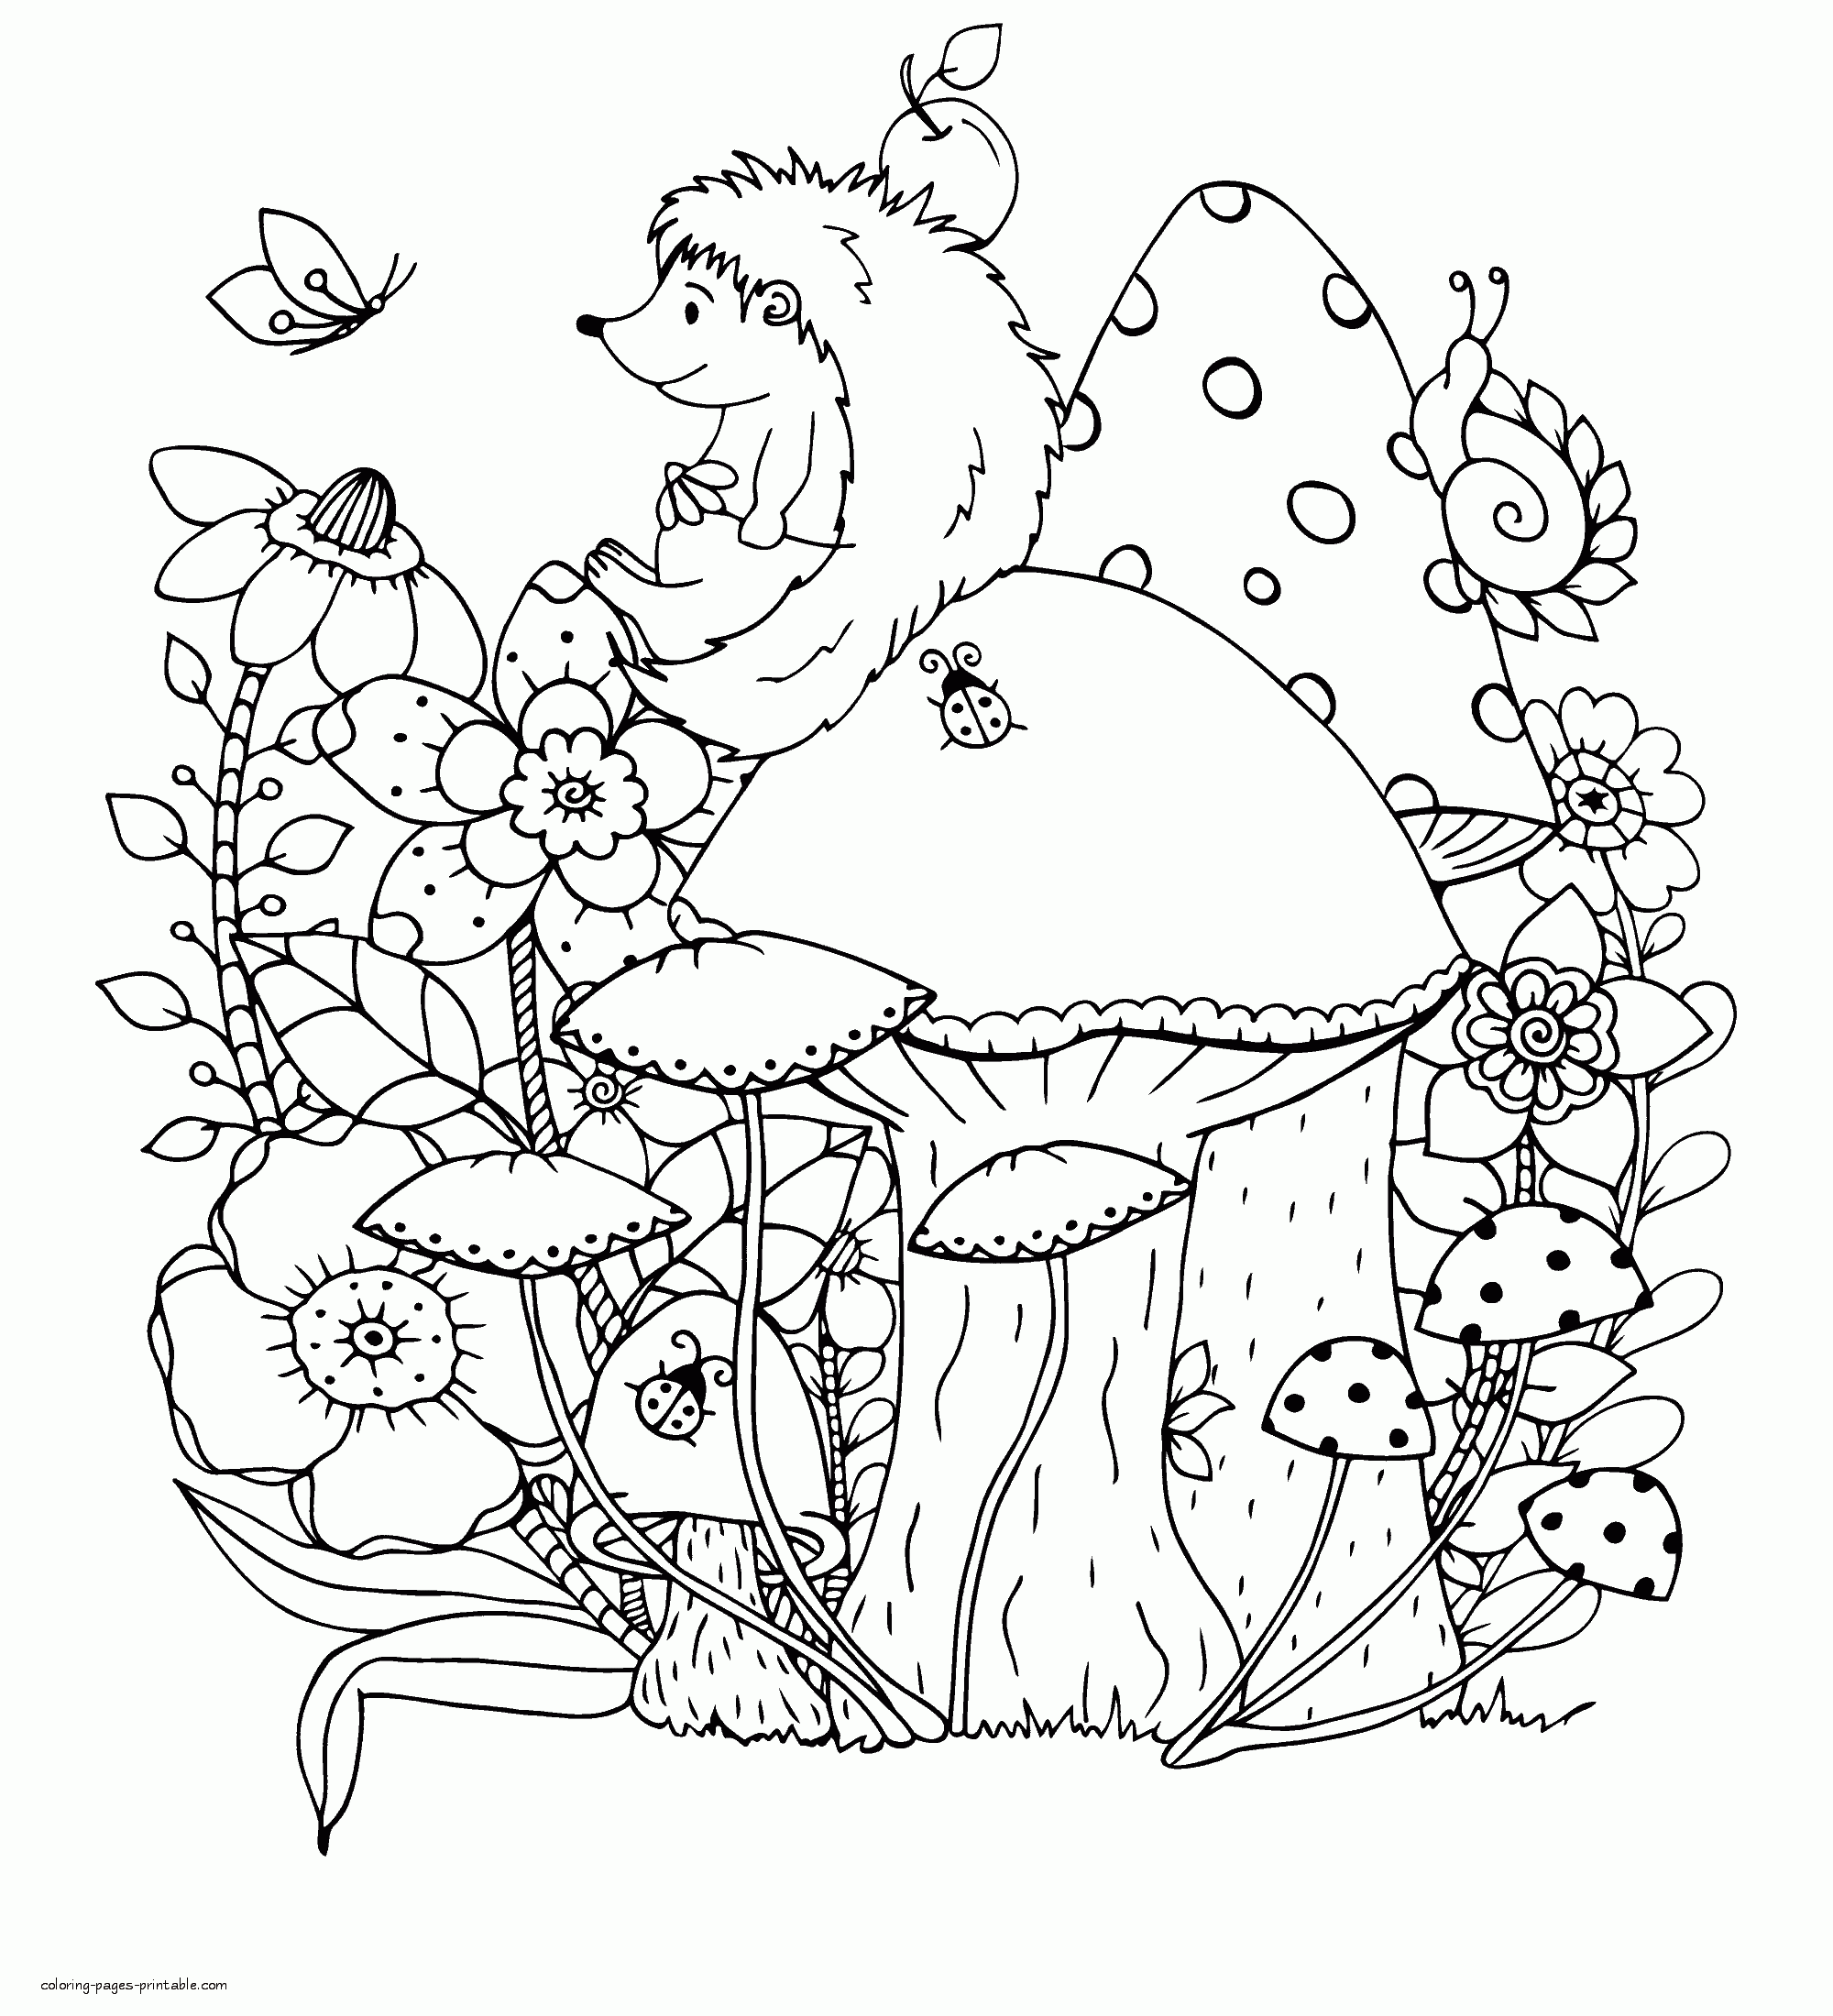 hedgehog-on-a-mushroom-coloring-sheet-coloring-pages-printable-com